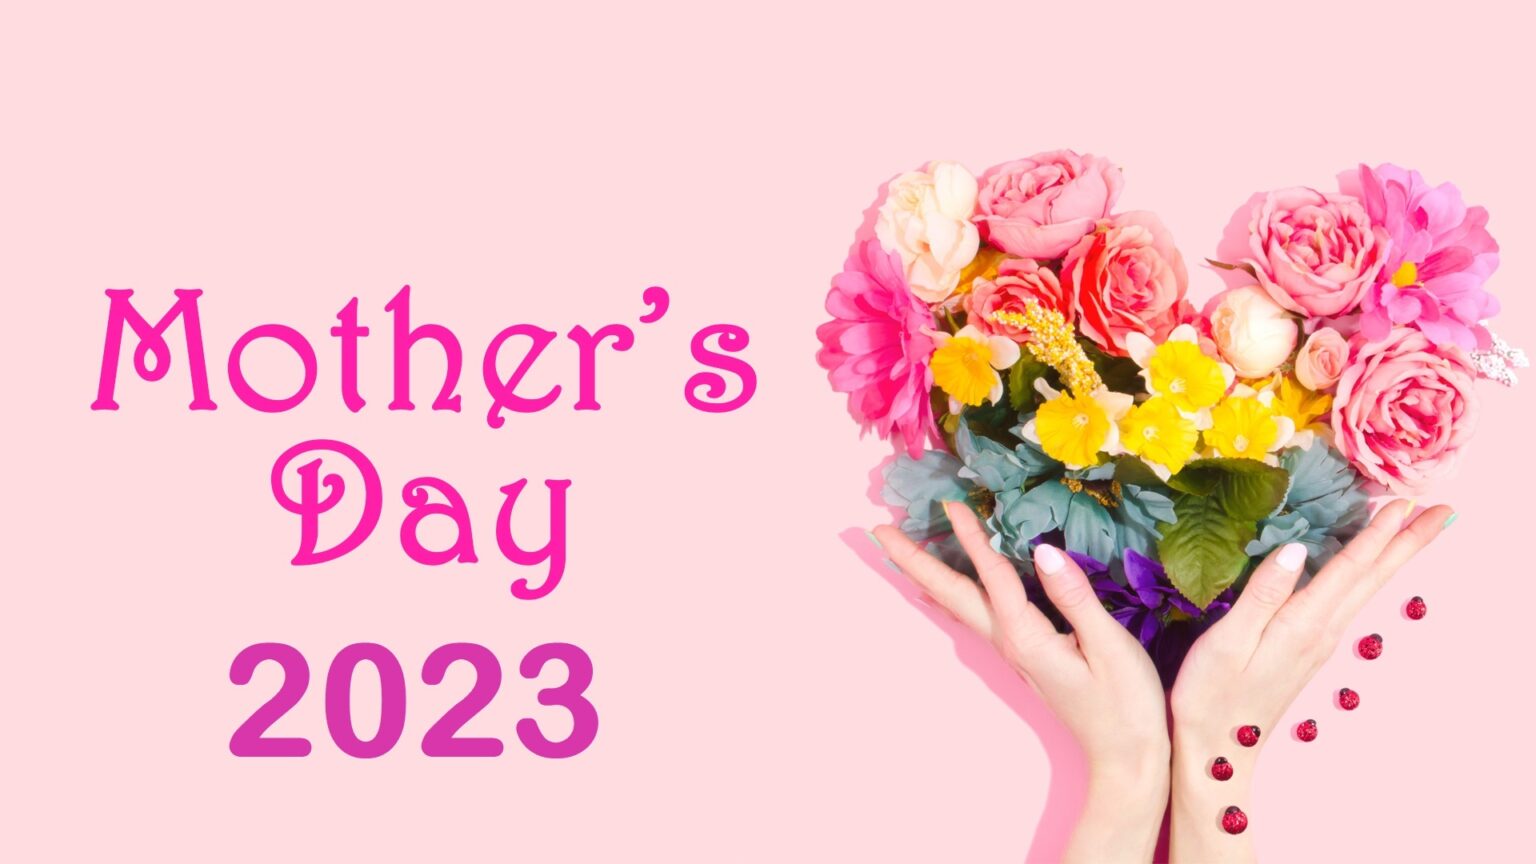 Celebrating Mother's Day 2023 The Difference Between UK and US